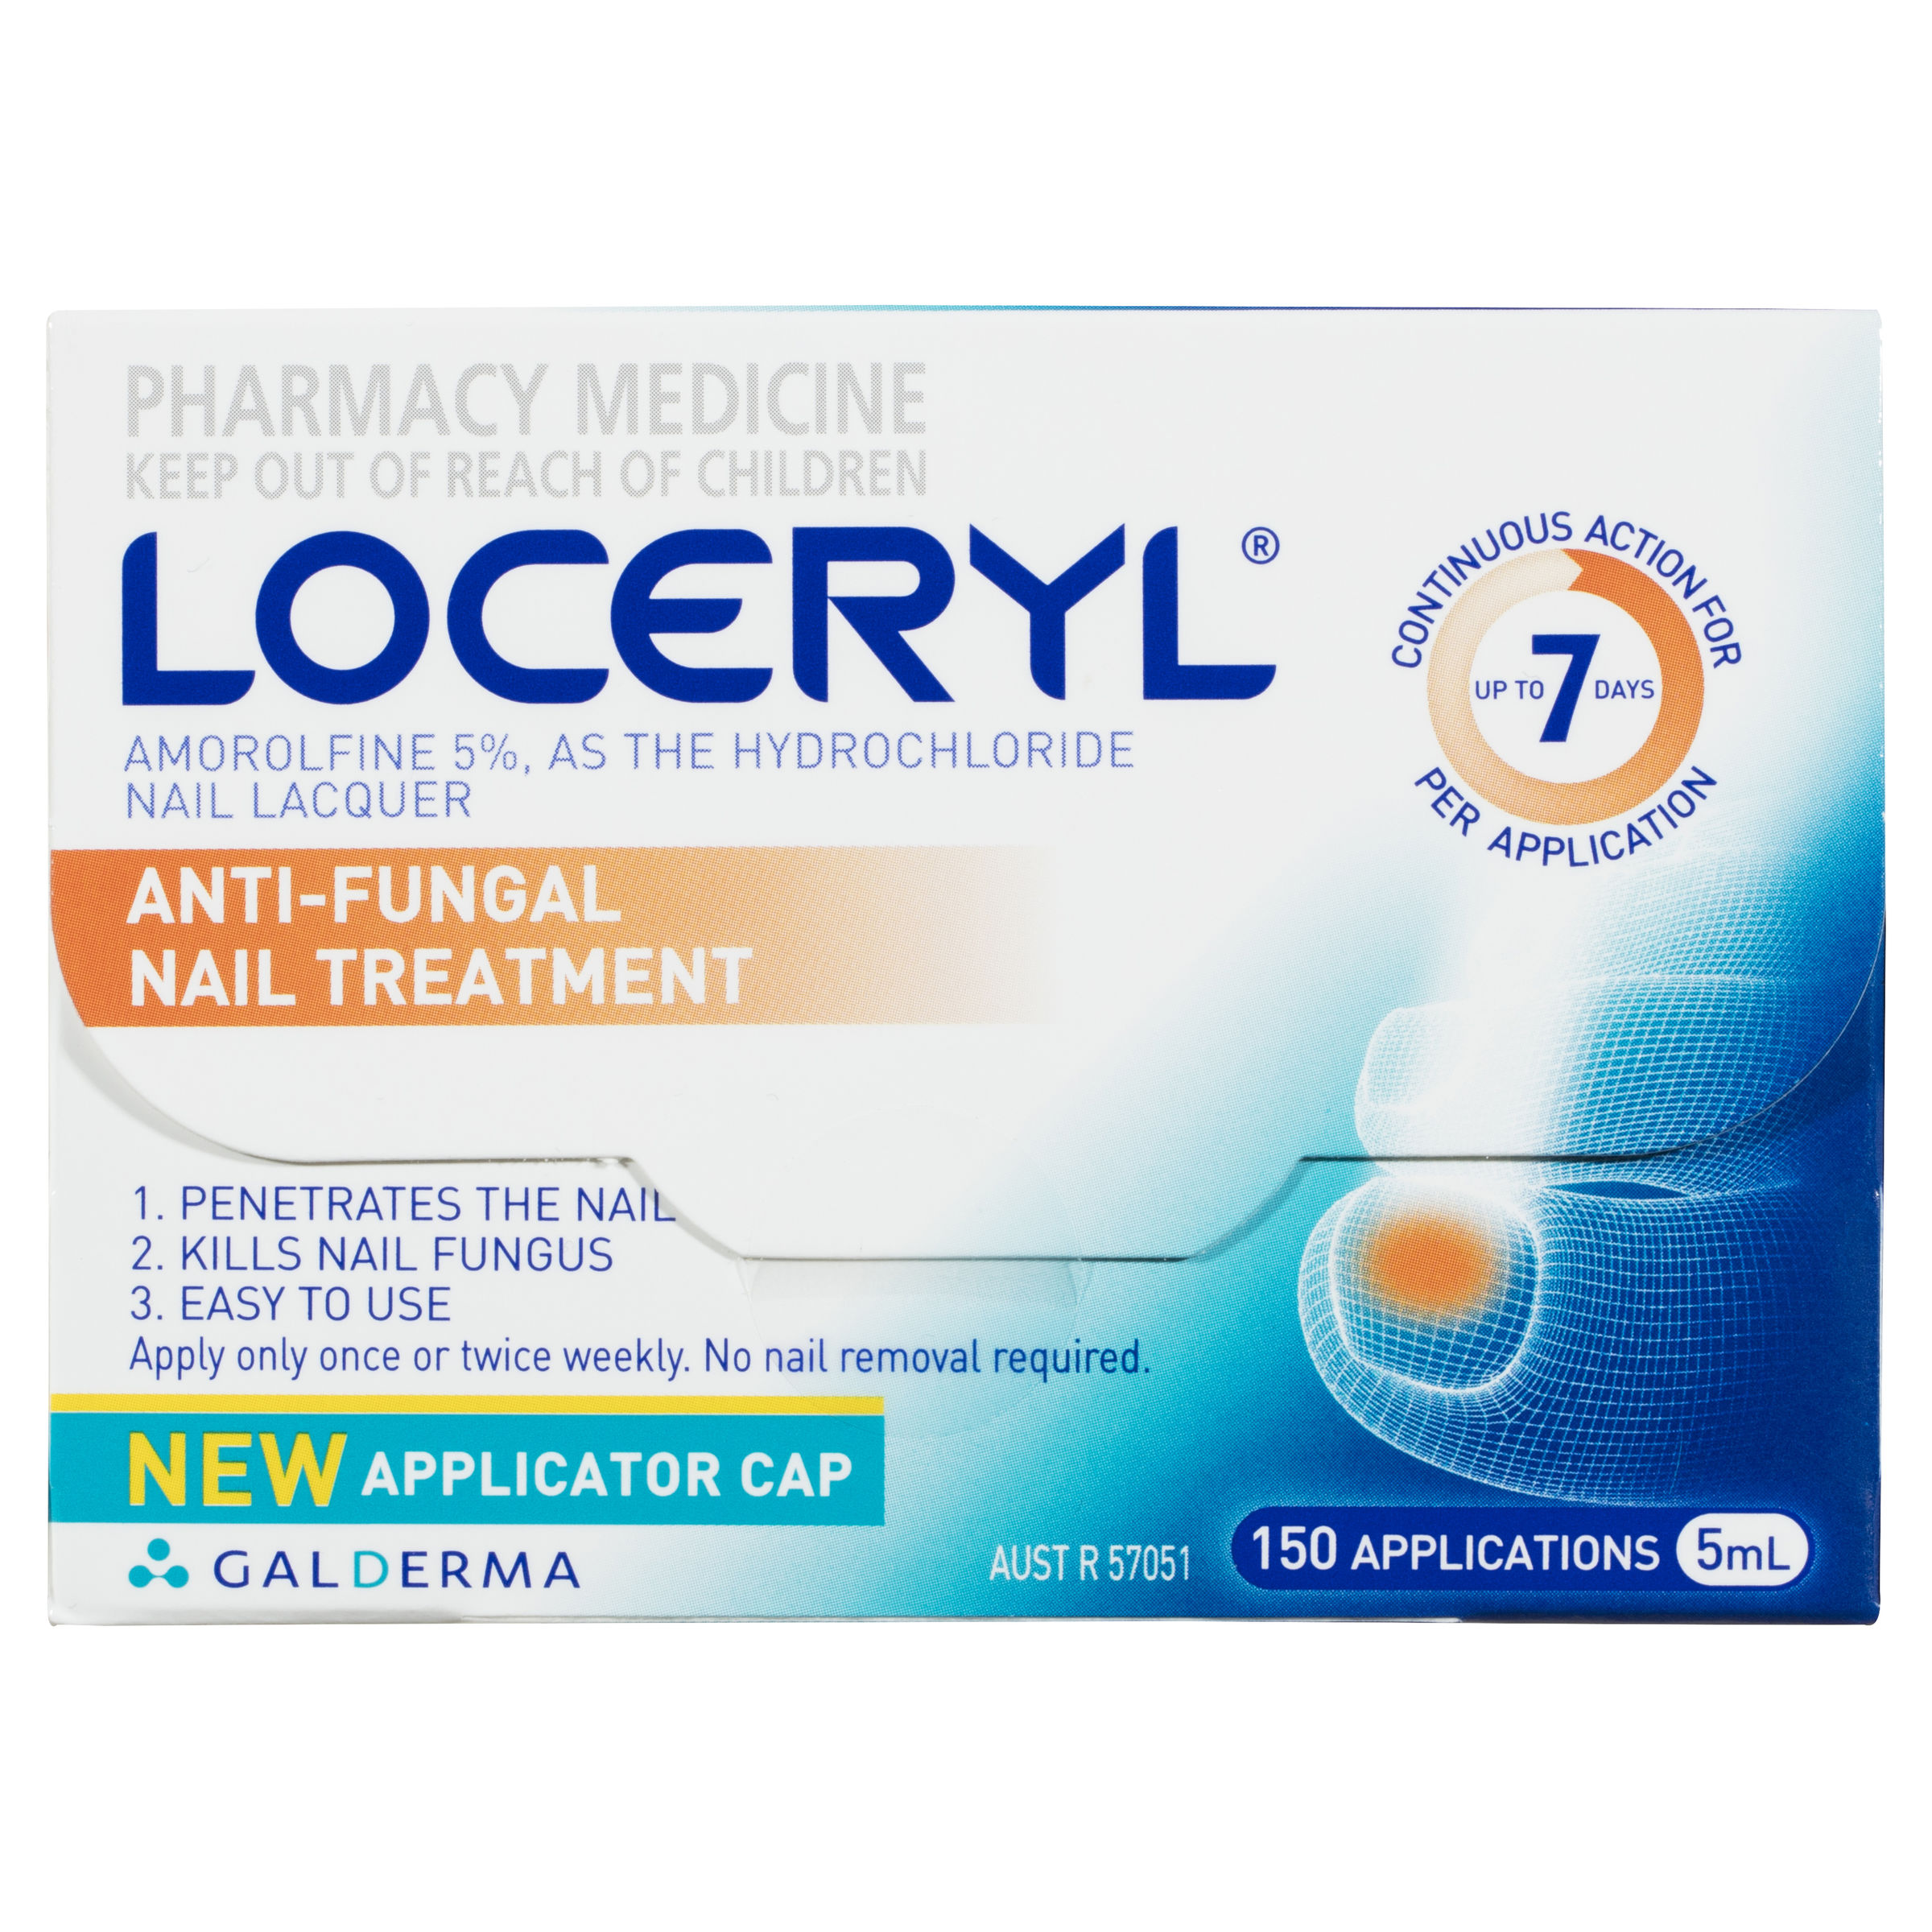 Loceryl Cream: View Uses, Side Effects, Price and Substitutes | 1mg